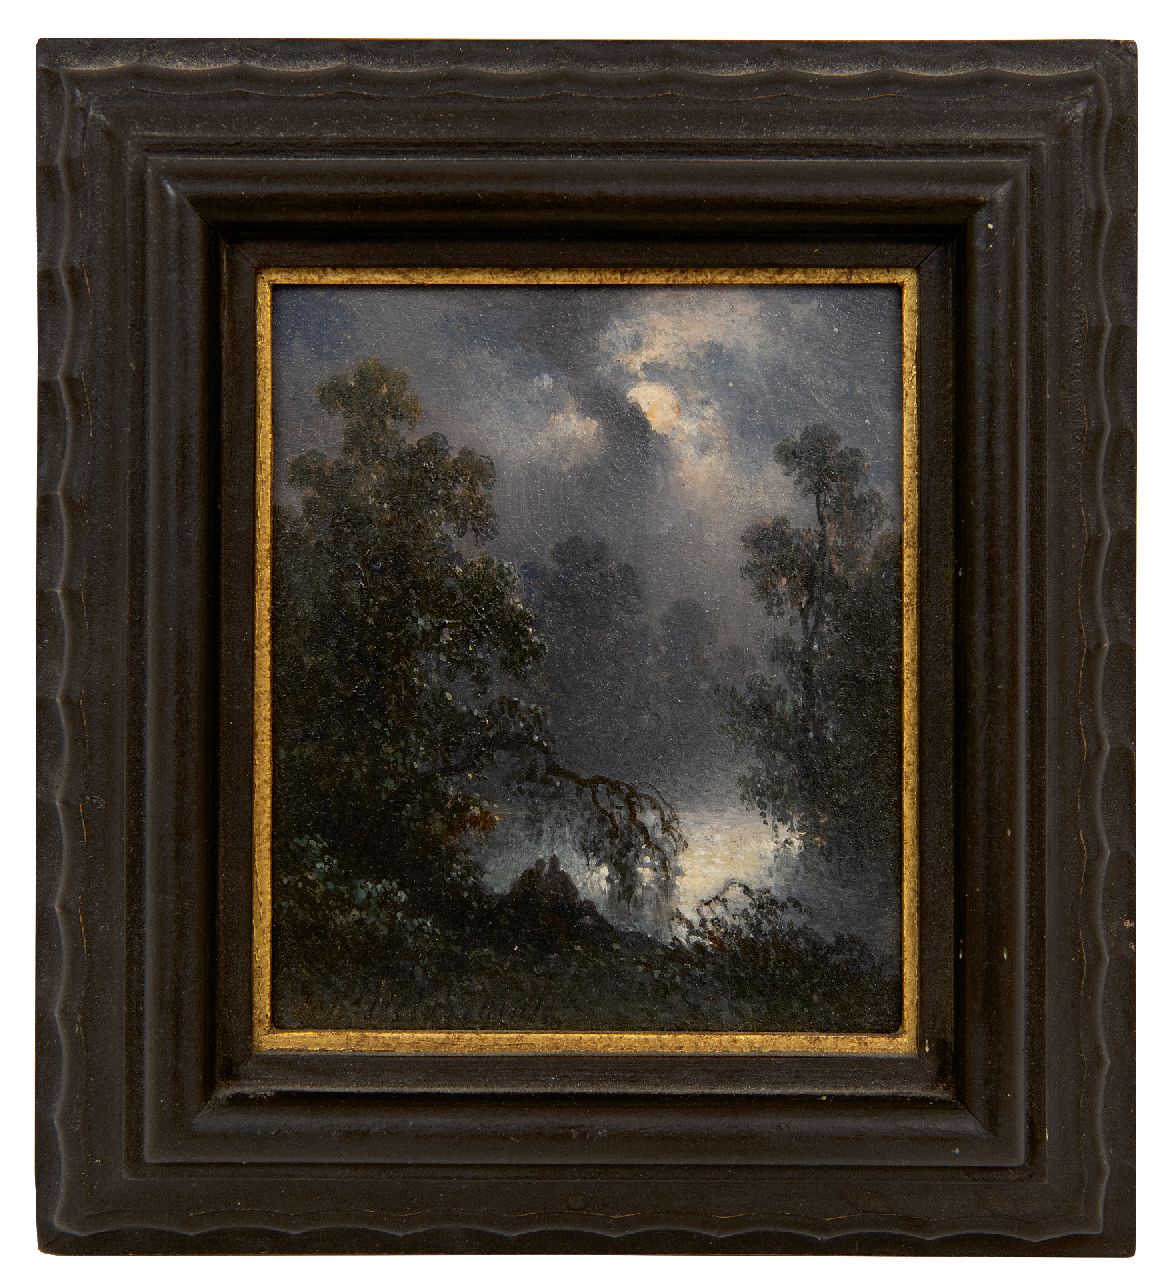 Hilverdink J.  | Johannes Hilverdink | Paintings offered for sale | A pond with two figures by moonlight, oil on panel 10.8 x 9.1 cm, signed l.l.